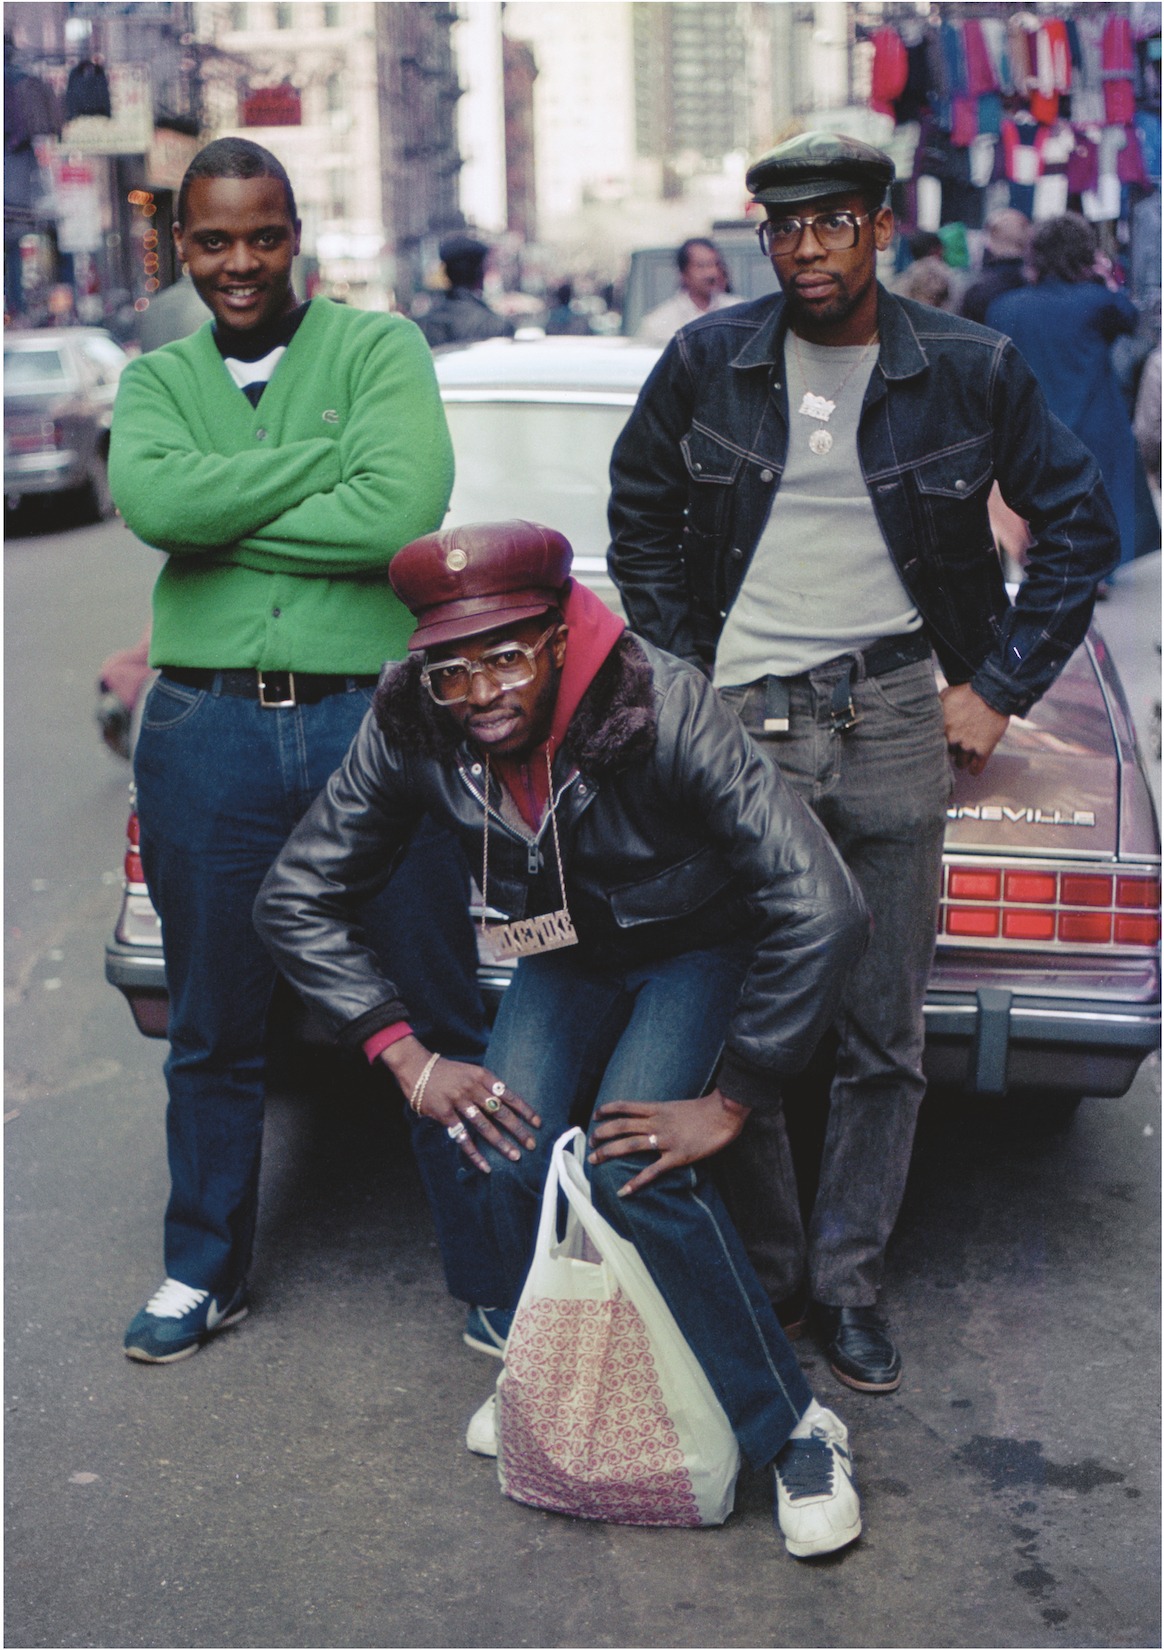 Street Photography Exhibition Qatar Brooklyn Jamel Shabazz 1980 Brooklyn in the House Vintage, Exhibition at The Gallery at VCUarts Qatar